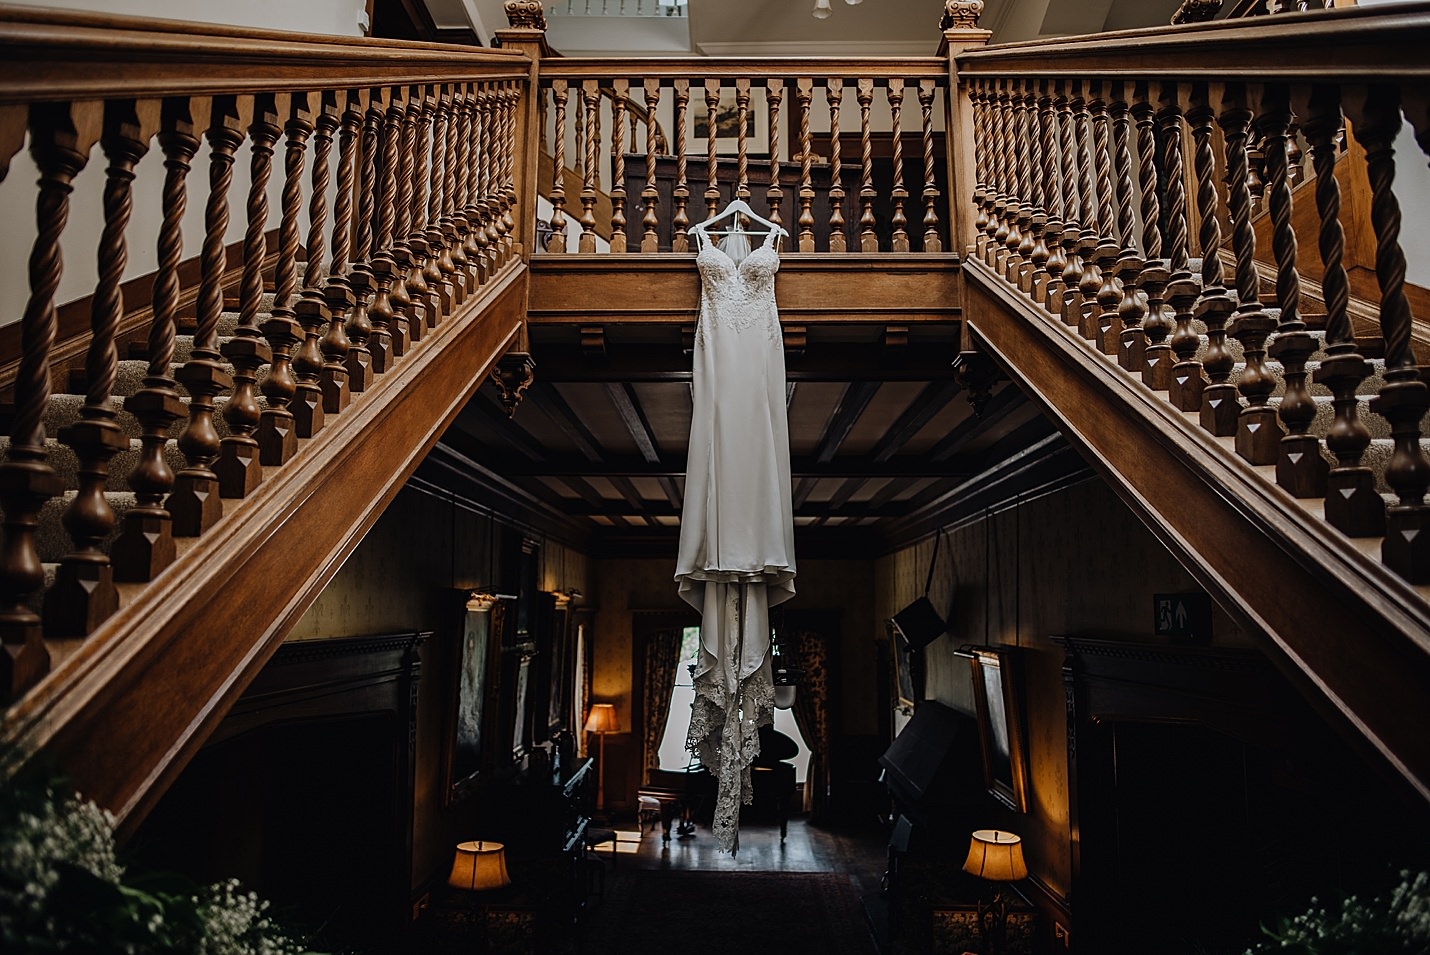 brides long white dress hanging from banister in venue hall martin vernham wedding photography